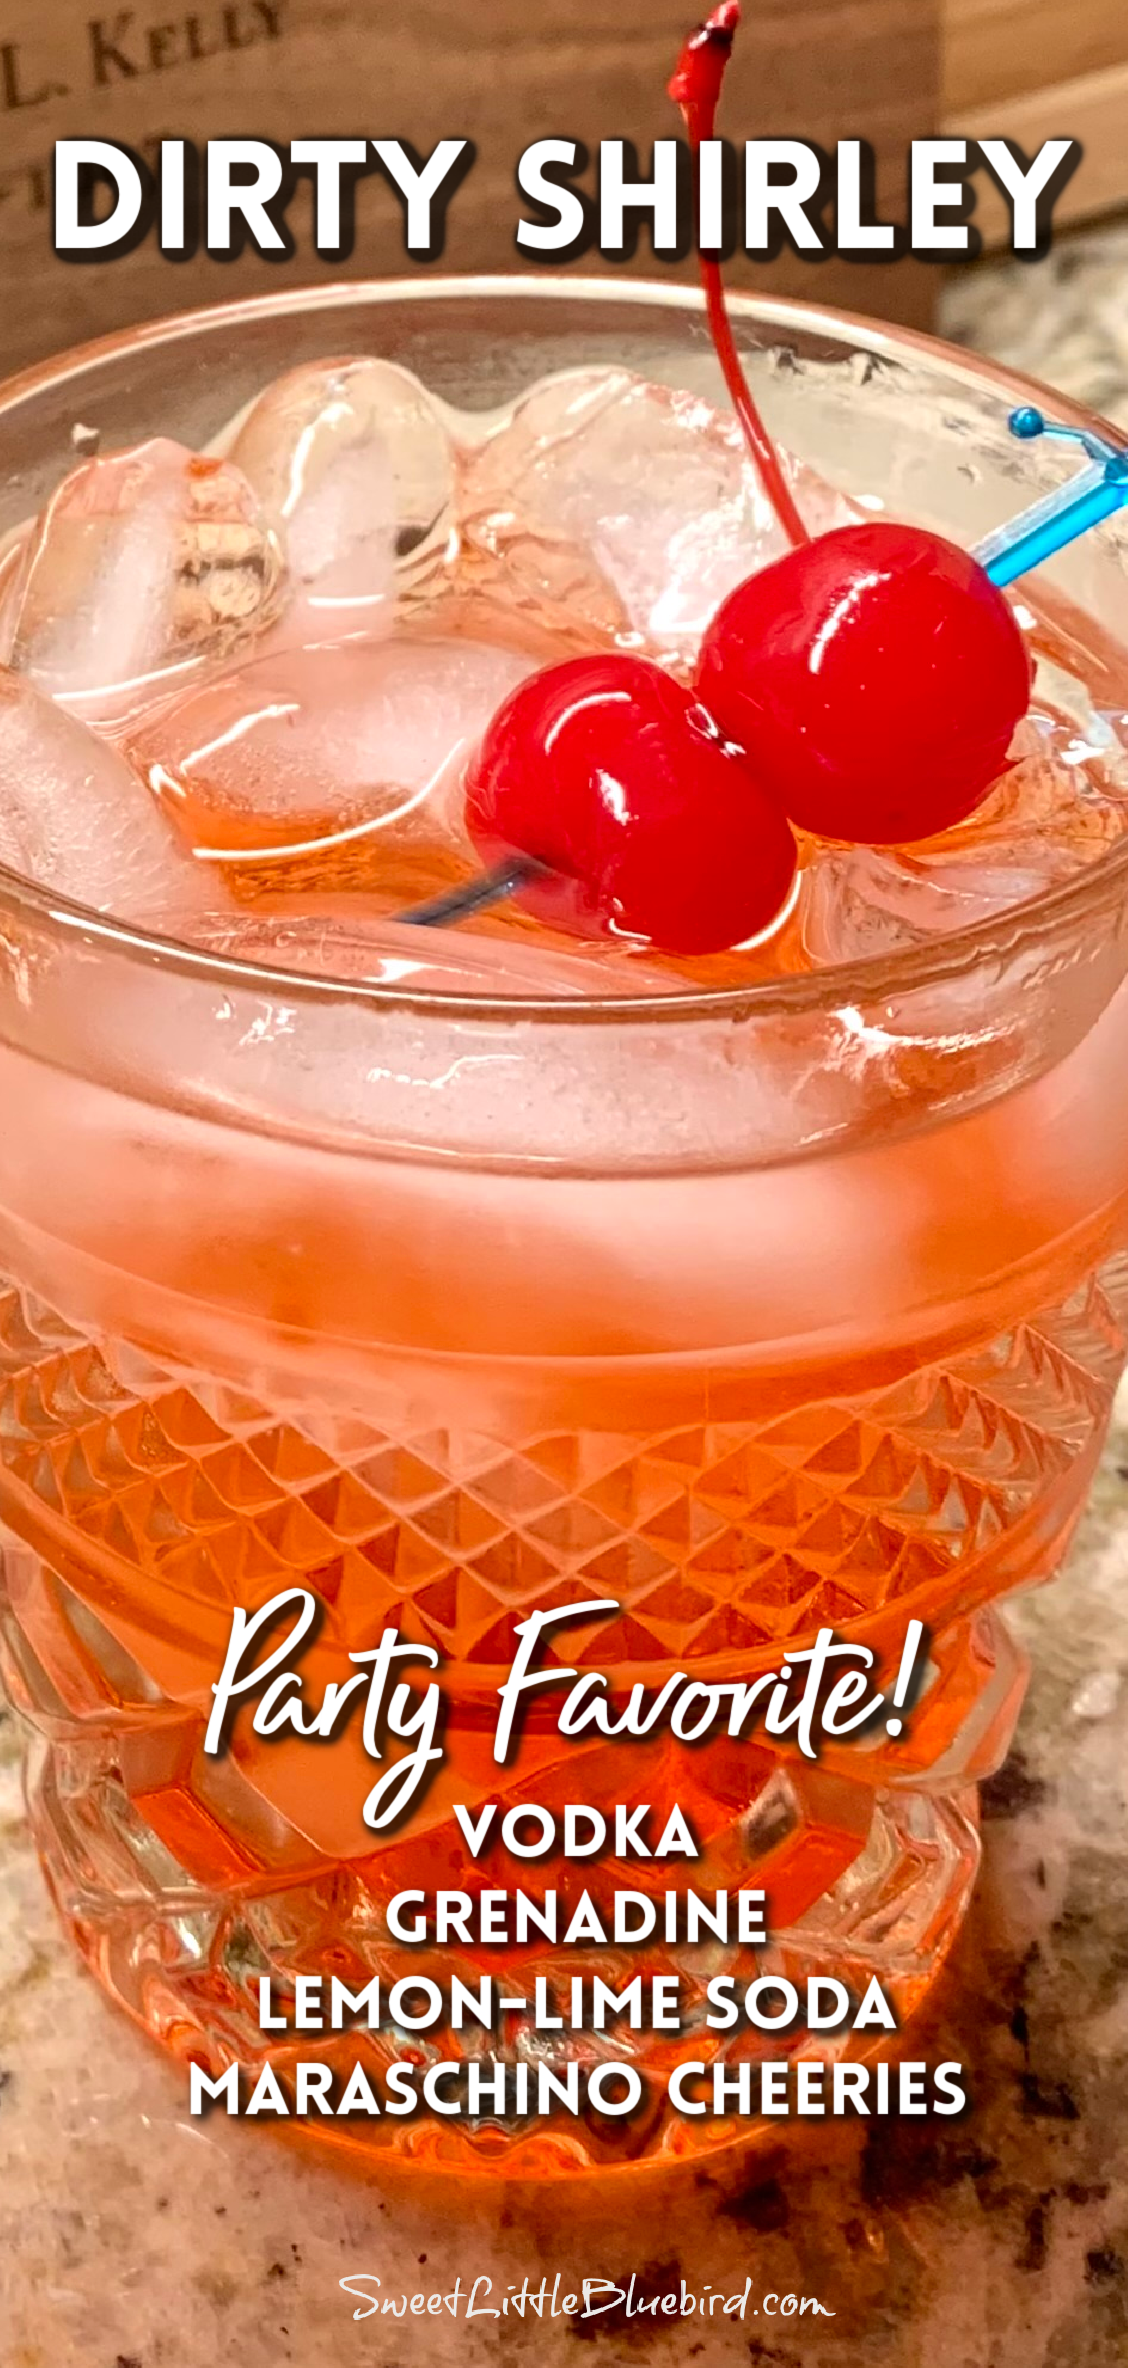 This image shows a Dirty Shirley in a glass, garnished with two maraschino cherries. There is a text graphic with the ingredients listed on the photo. 